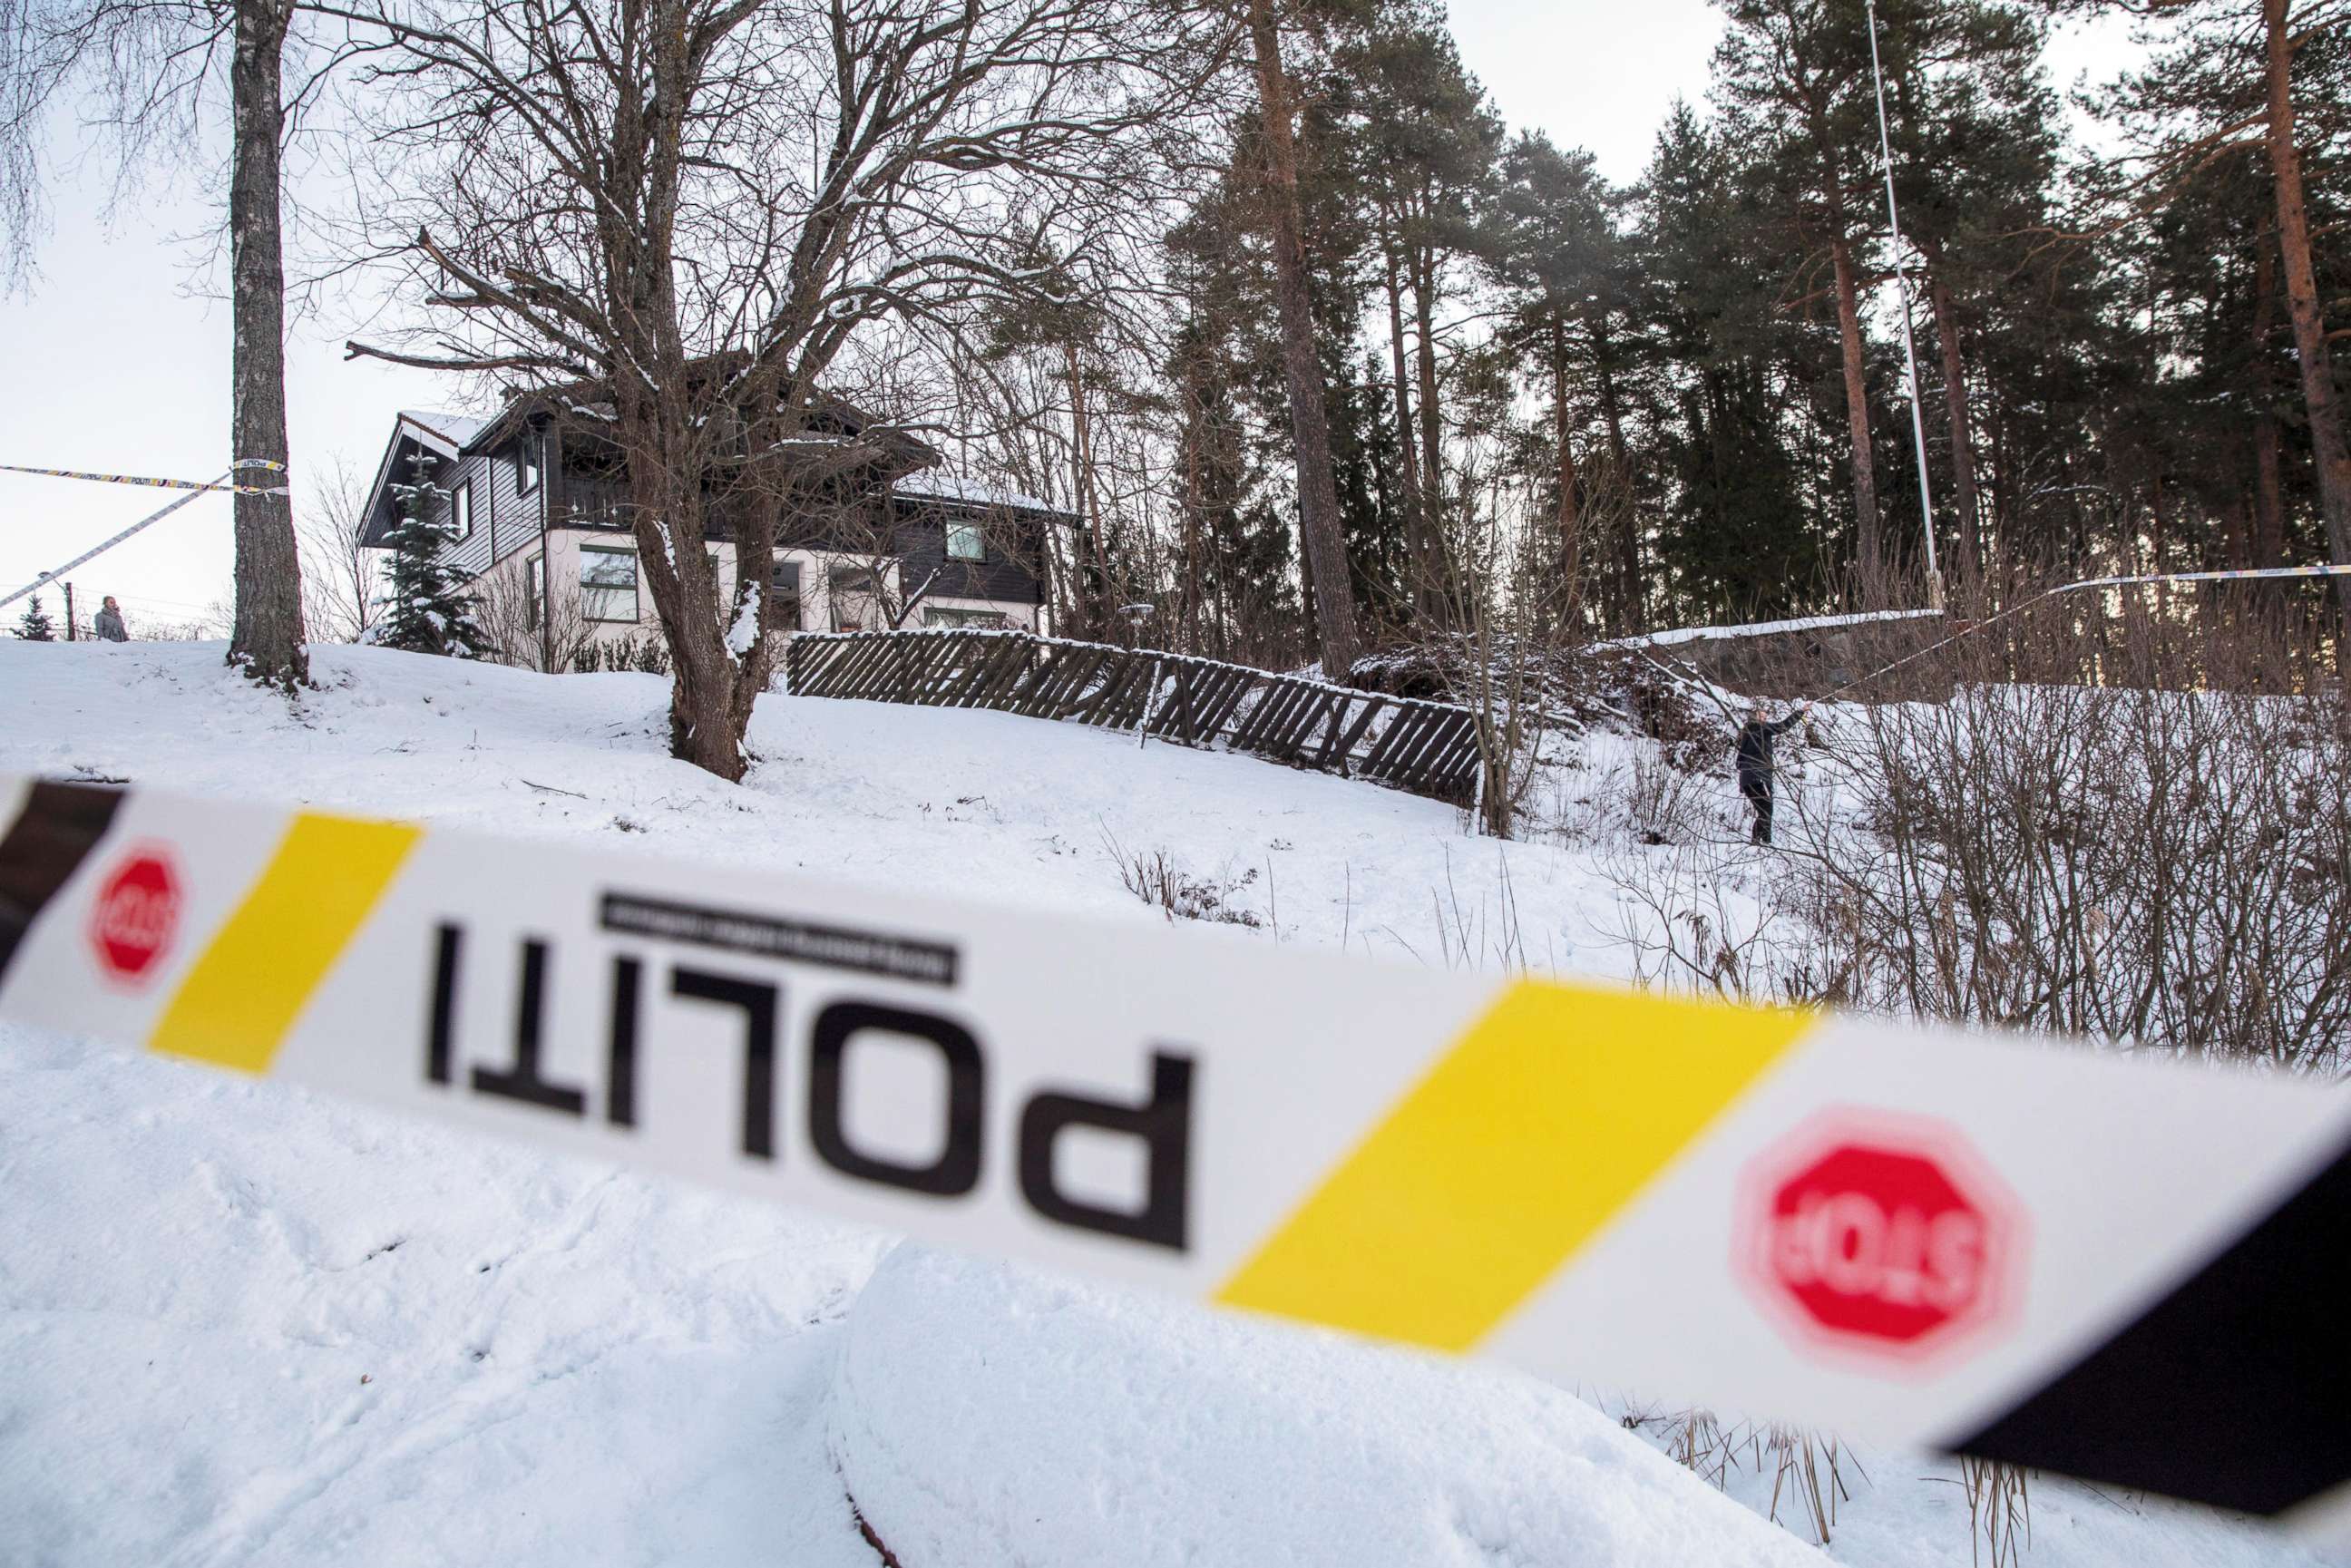 PHOTO: Police work outside the house of Norwegian Anne-Elisabeth Falkevik Hagen, who is the wife of real estate investor Tom Hagen, and has been kidnapped according to local media, in Fjellhamar, Norway Jan. 9, 2019.